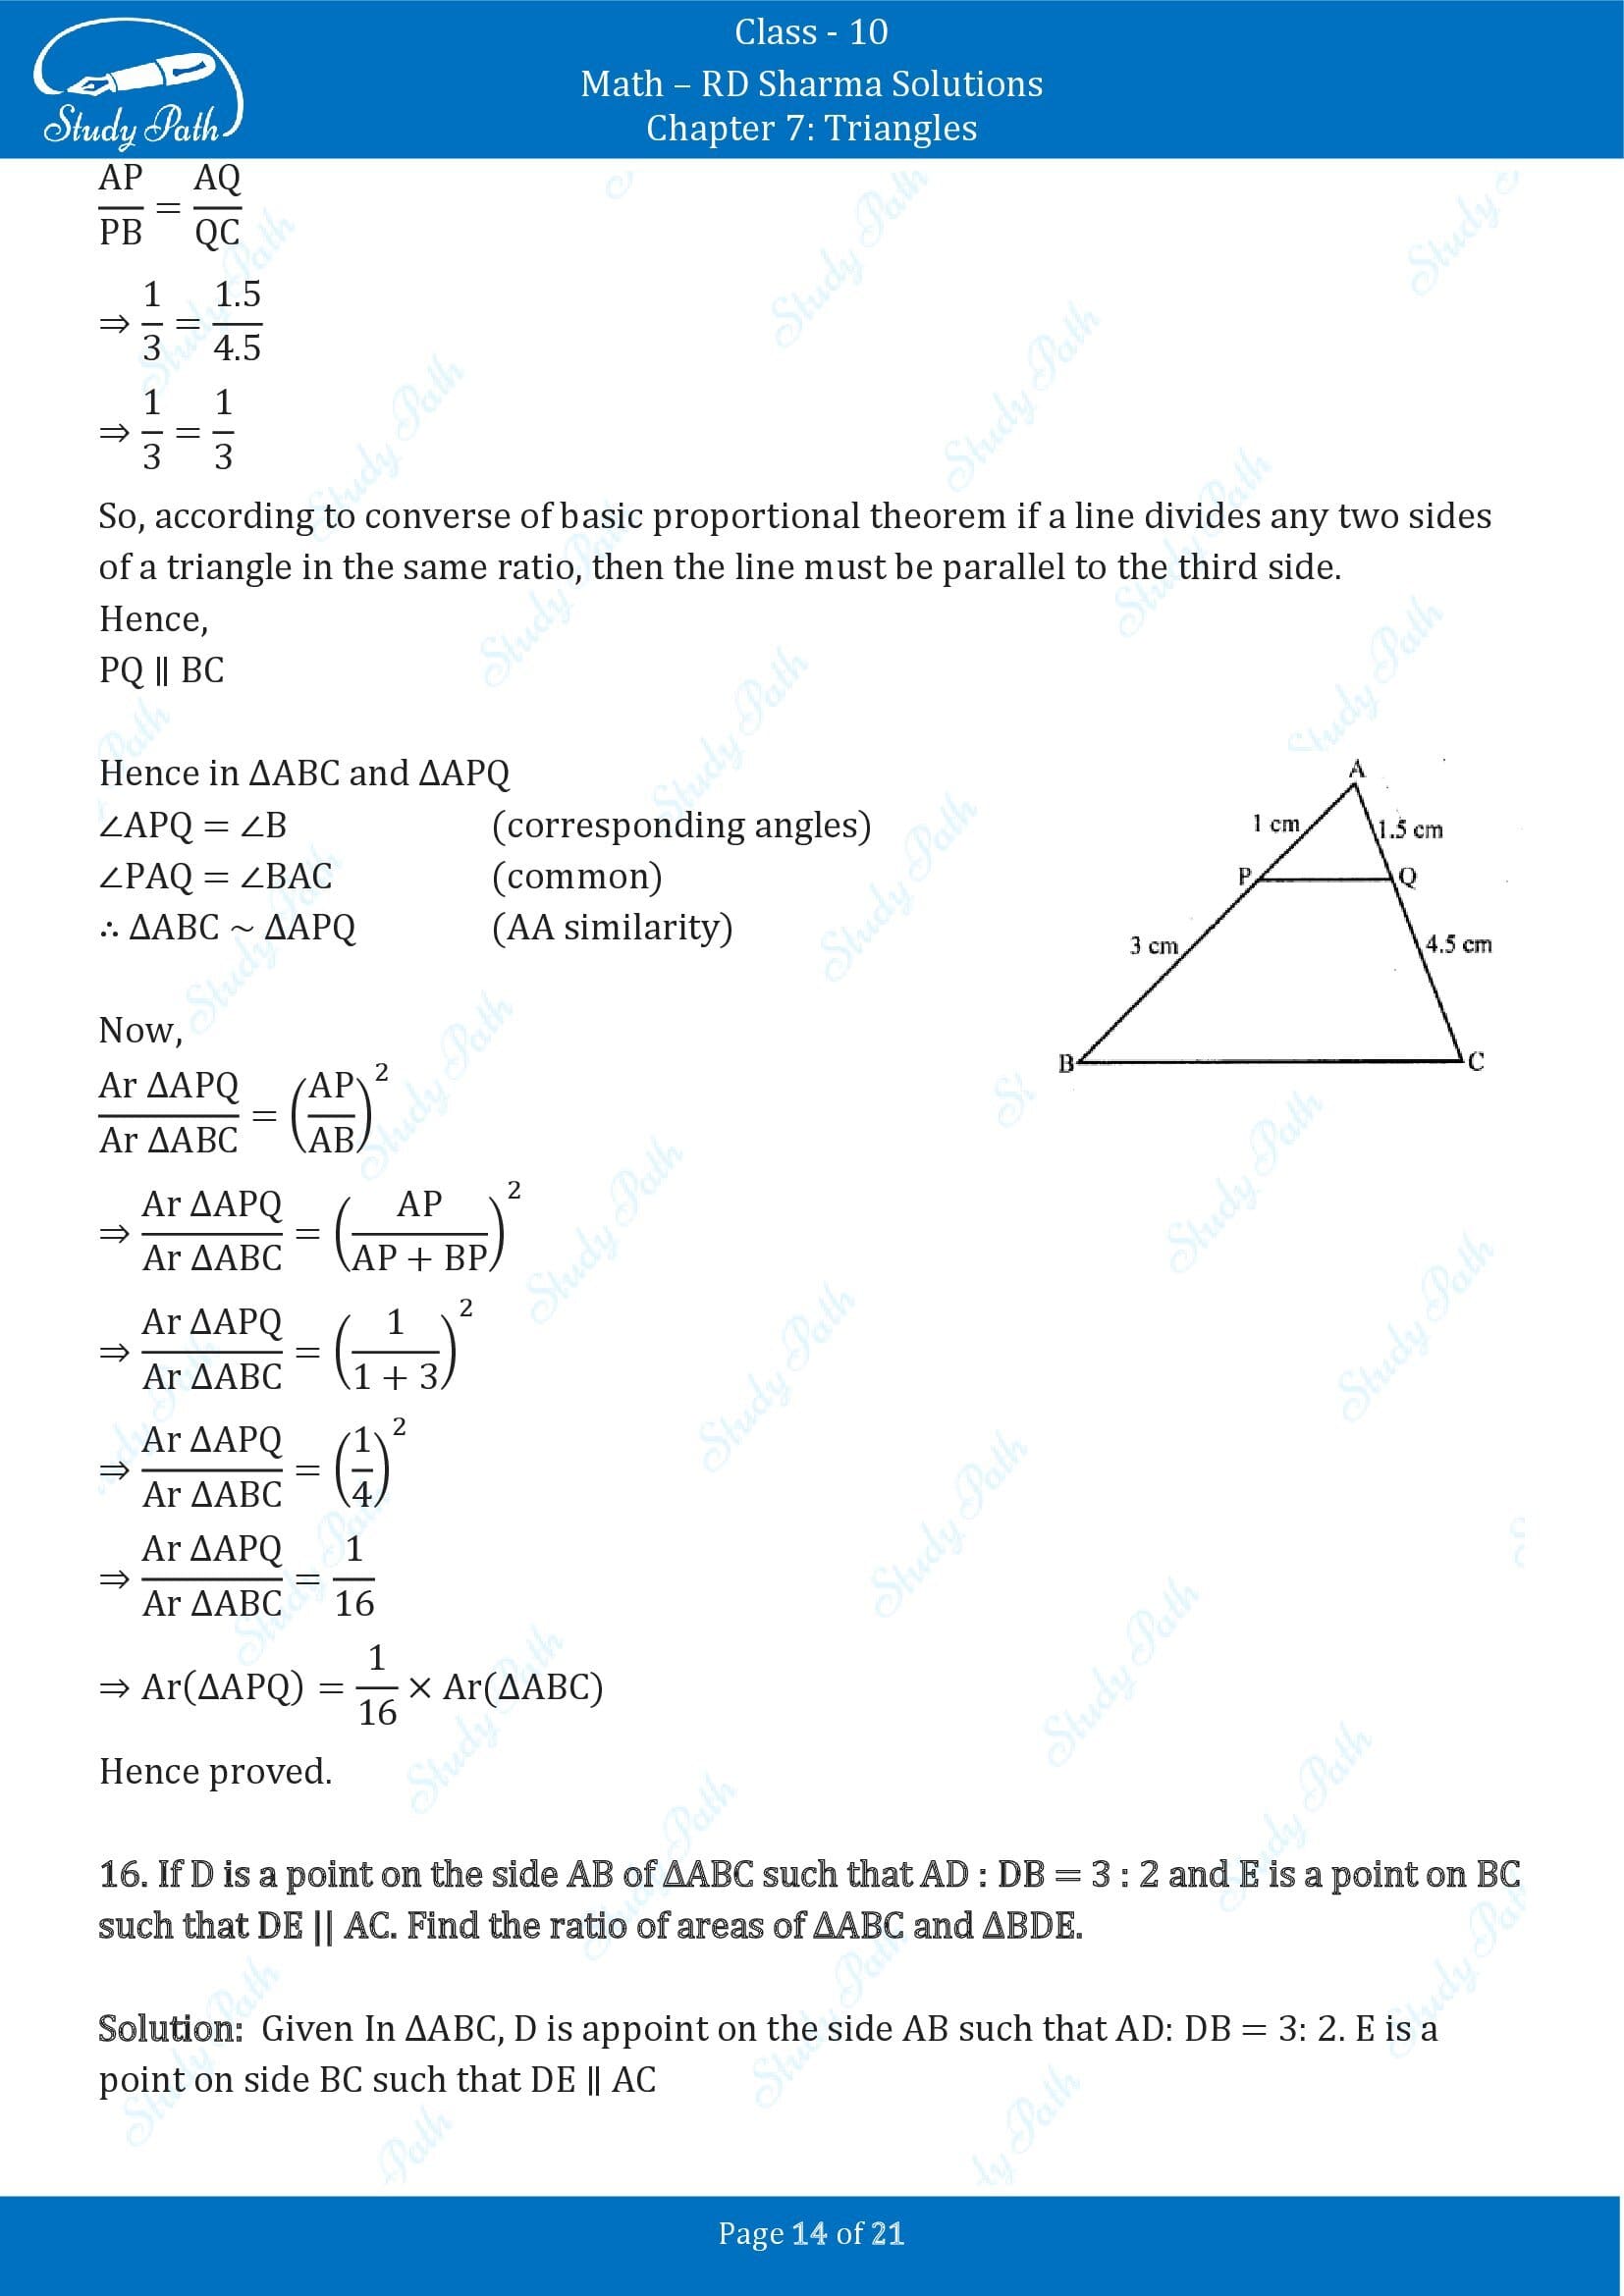 RD Sharma Solutions Class 10 Chapter 7 Triangles Exercise 7.6 00014